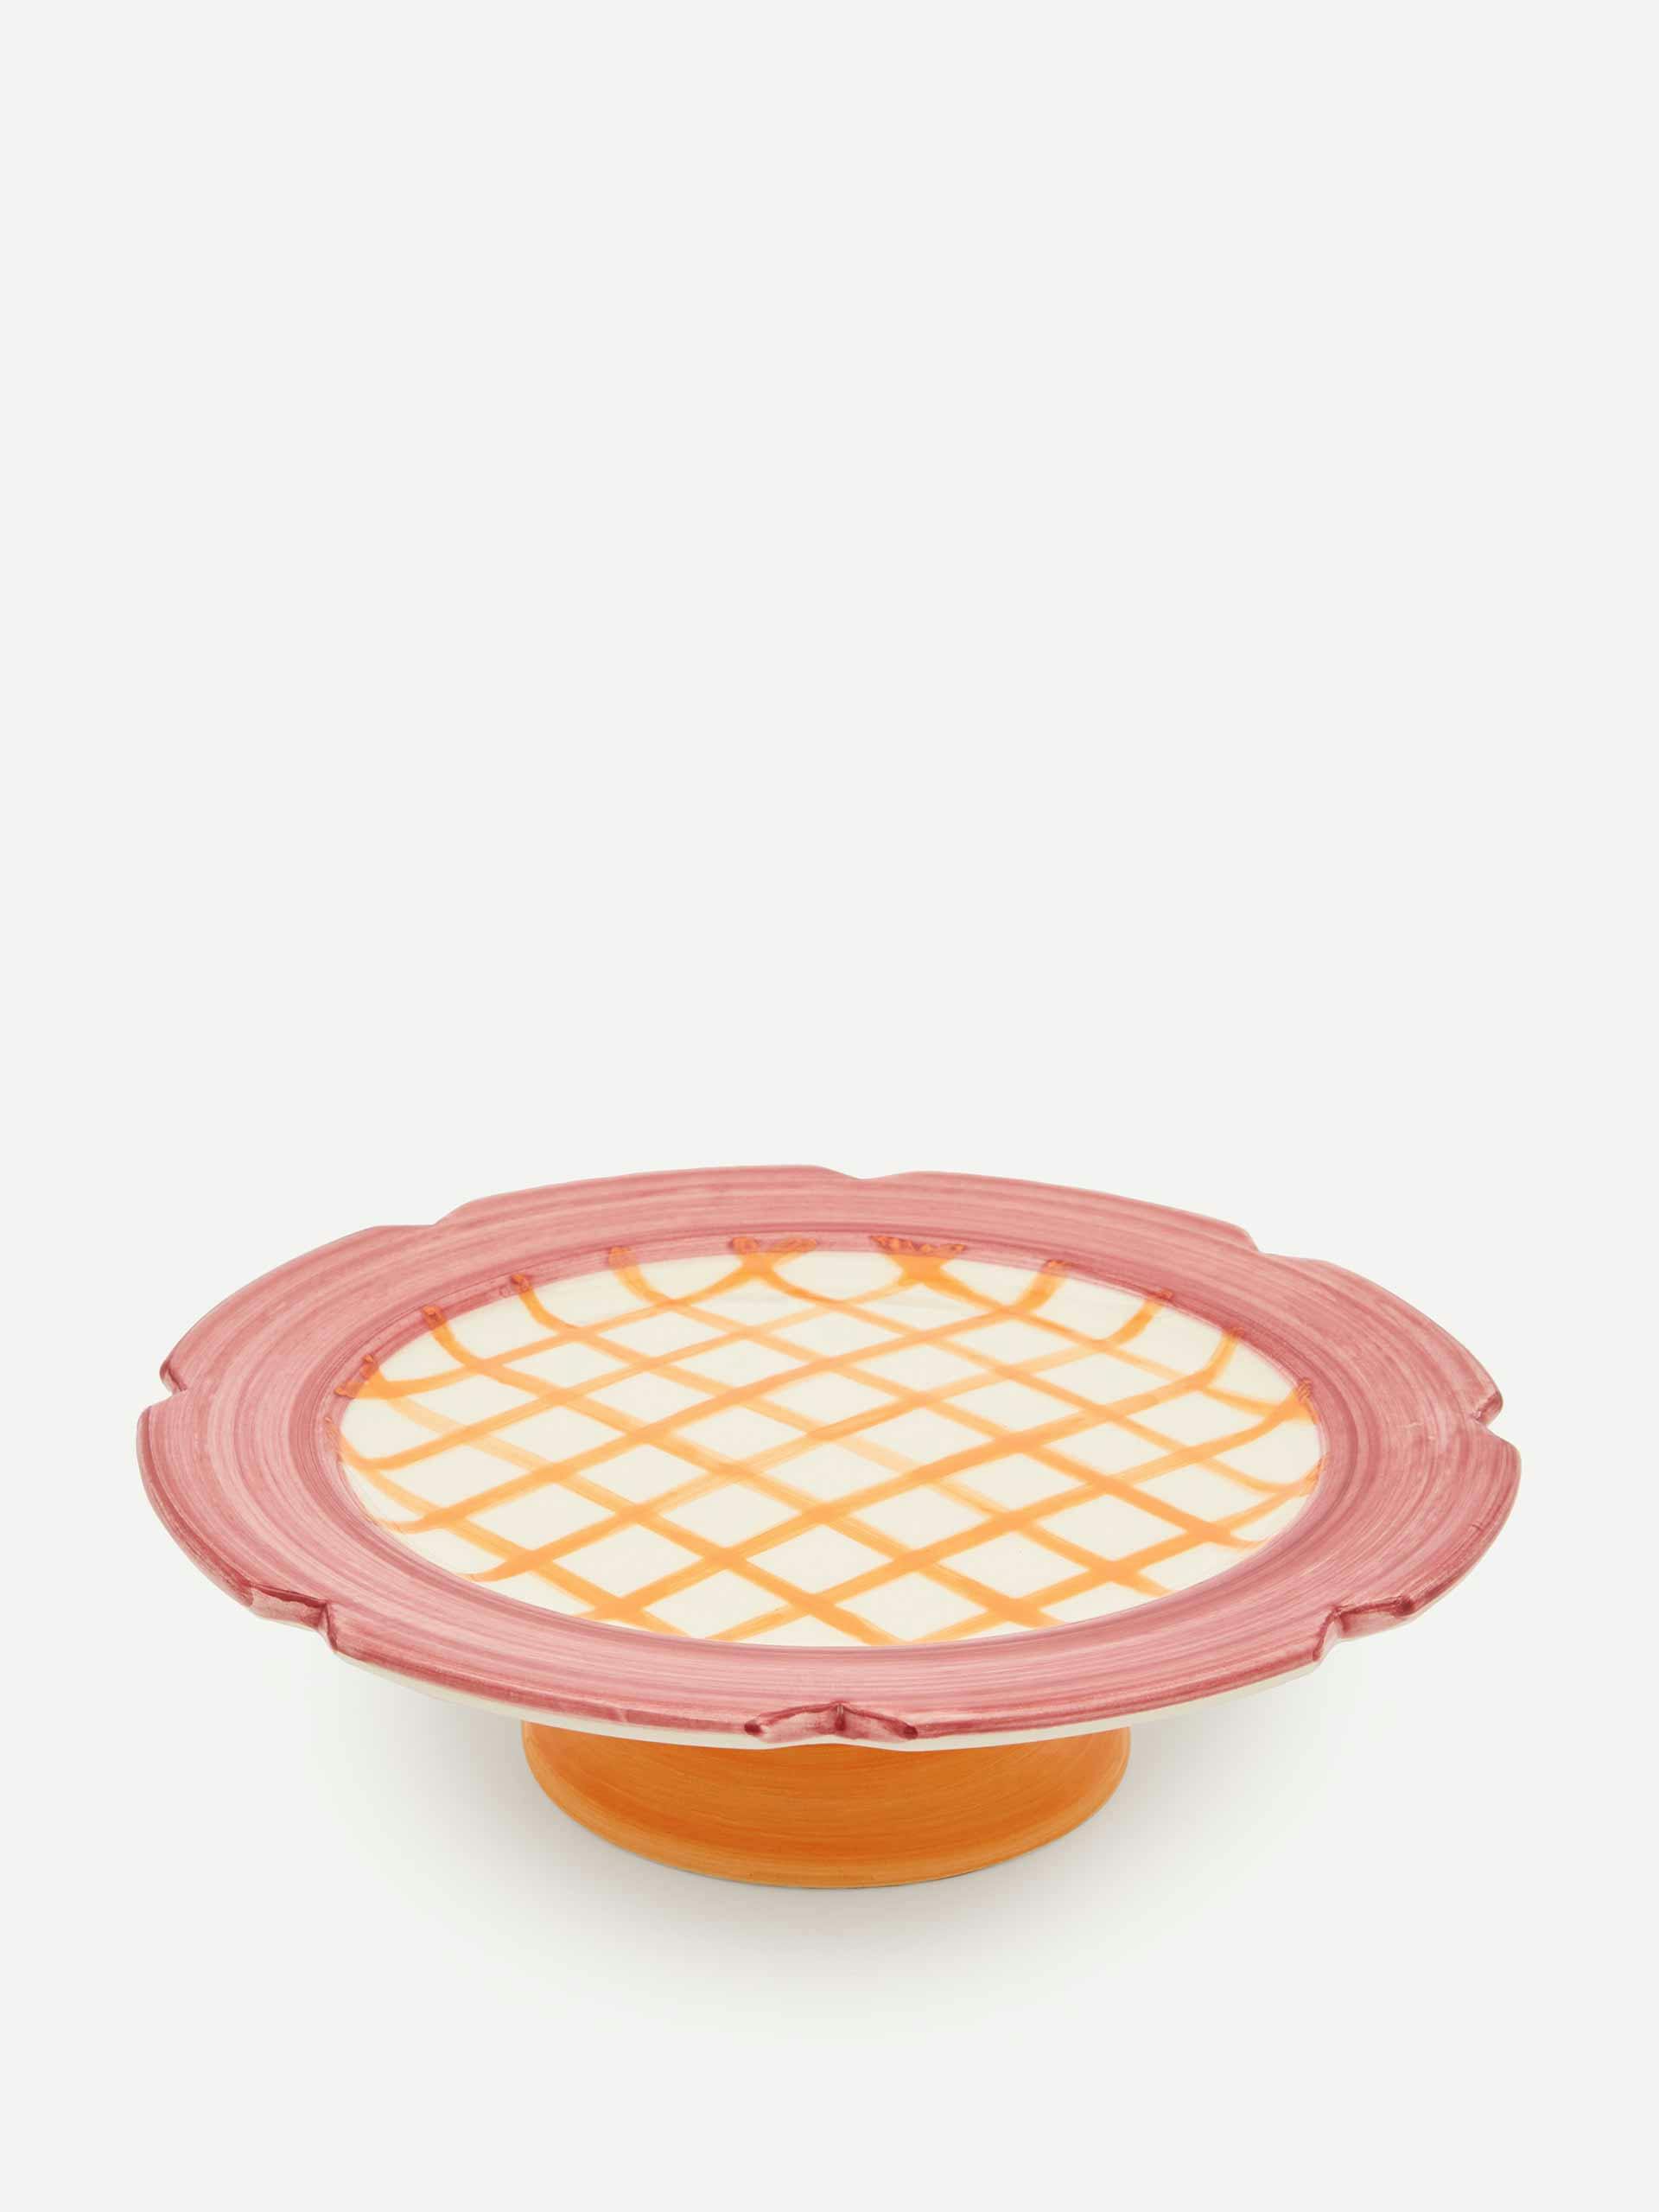 Hot Cakes cake stand